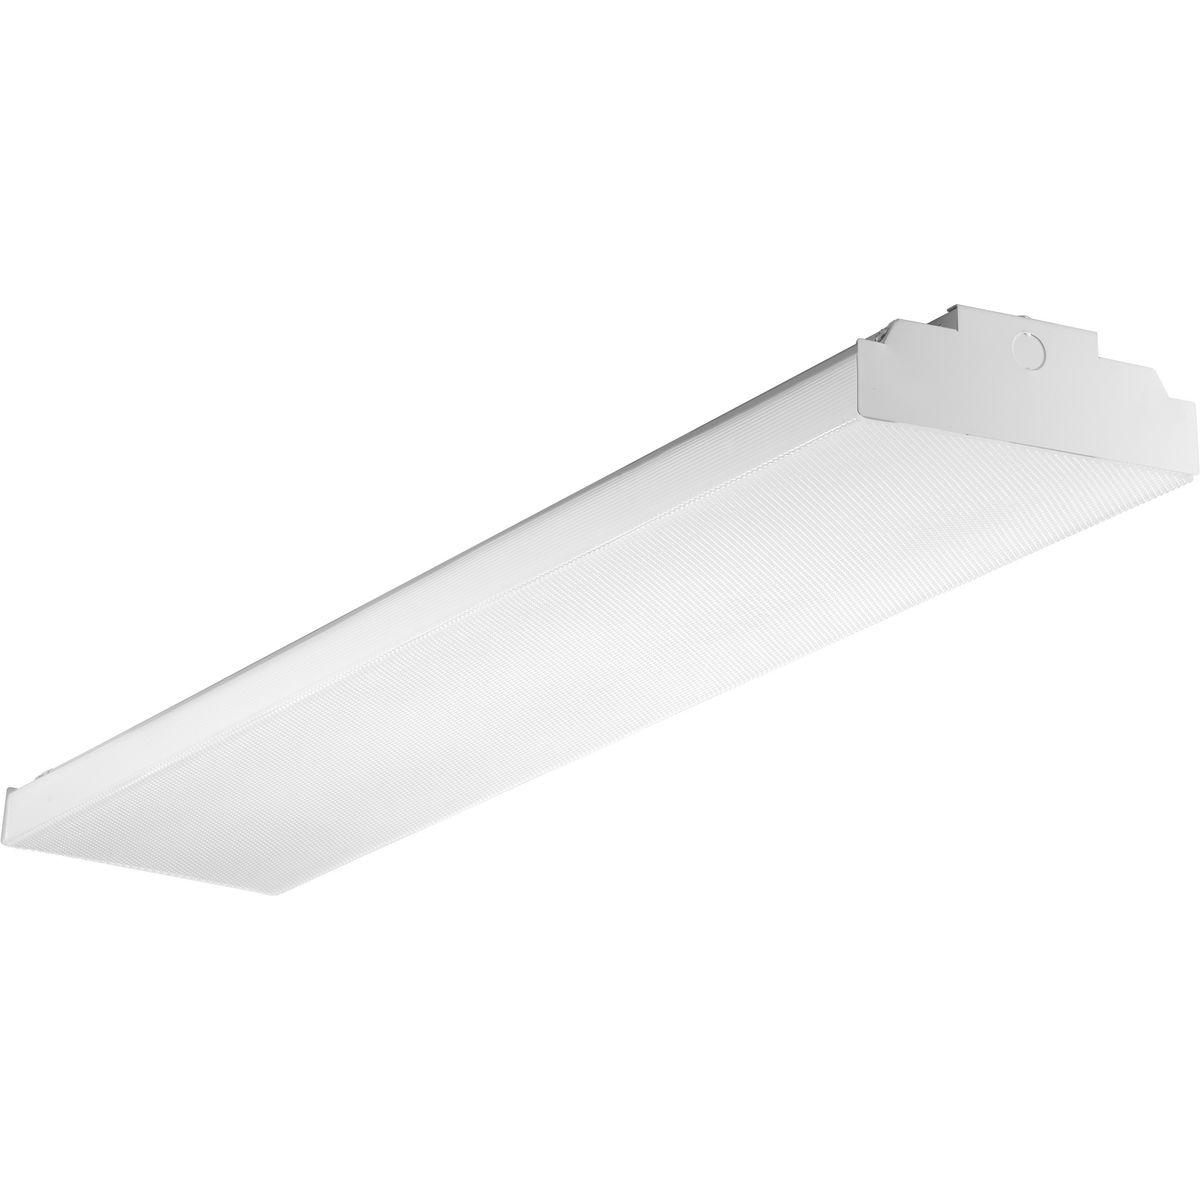 Hubbell PCIAW-LED-4-40K PCIAW is a 4FT LED Wraparound with frosted acrylic lens. This product is surface mounted to the ceiling with fully assembled for quick installation. DesignLights Consortium (DLC) qualified.  ; Long Life 50,000 hour LEDs for reduced maintenance ; Heavy gau